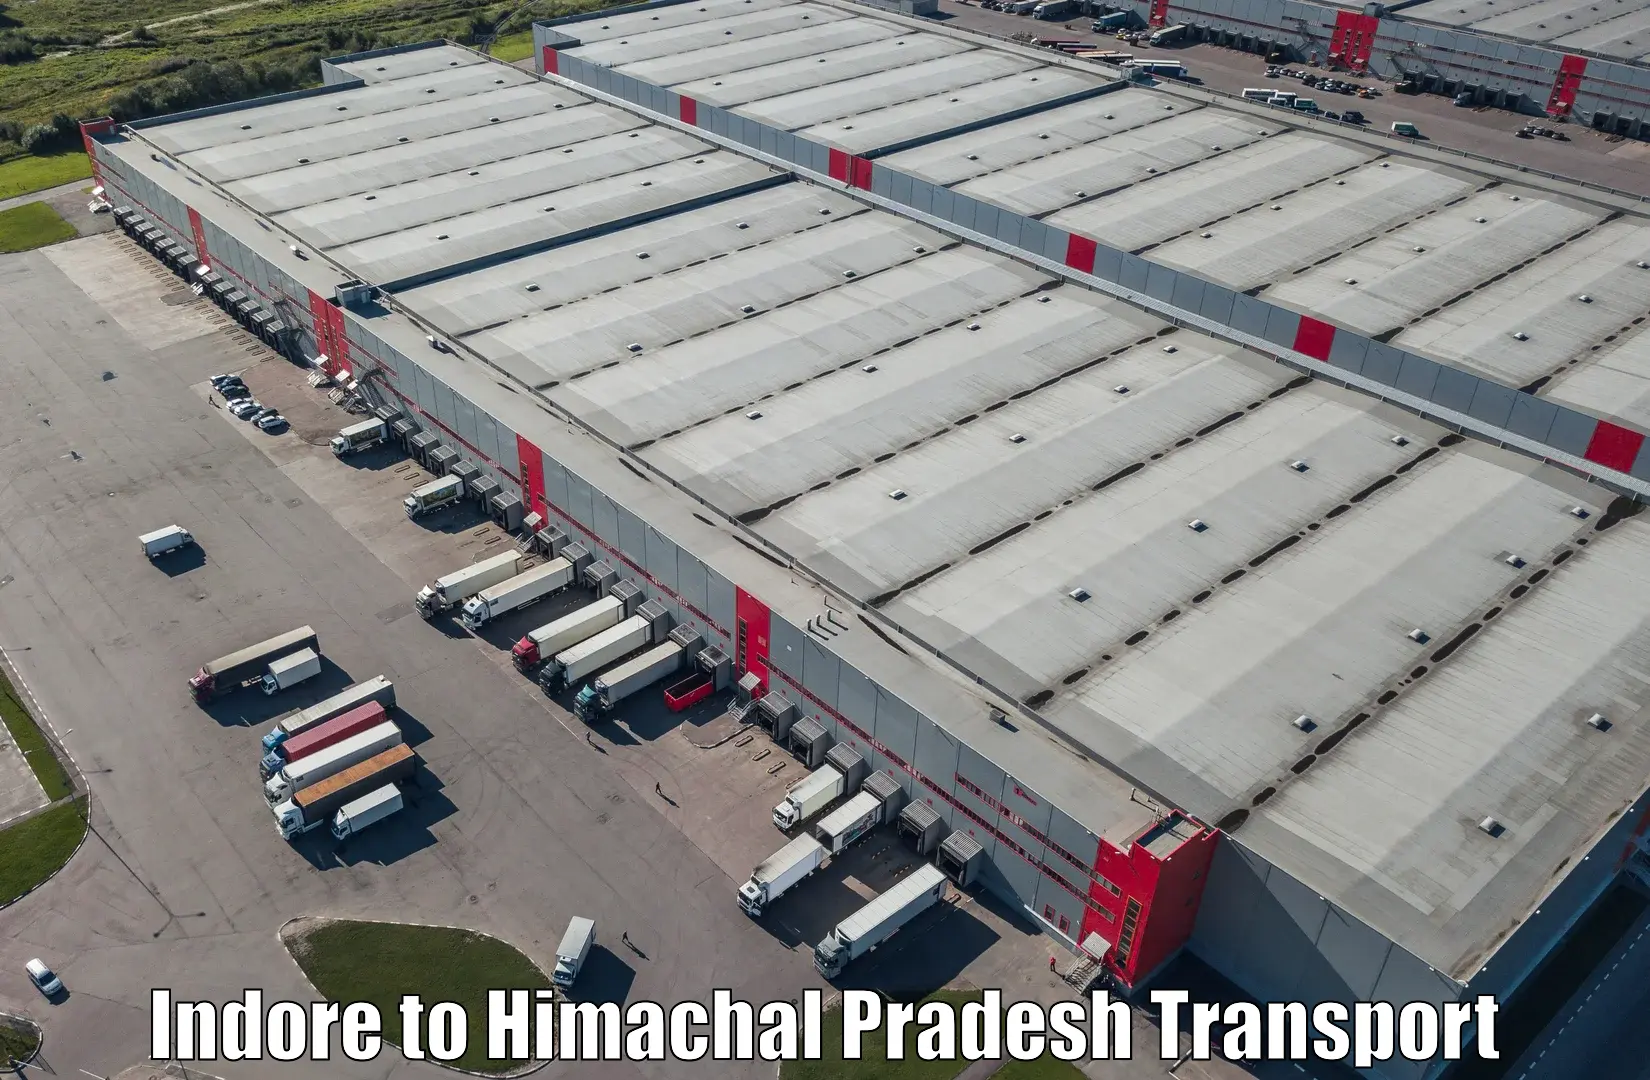 Truck transport companies in India Indore to Jukhala